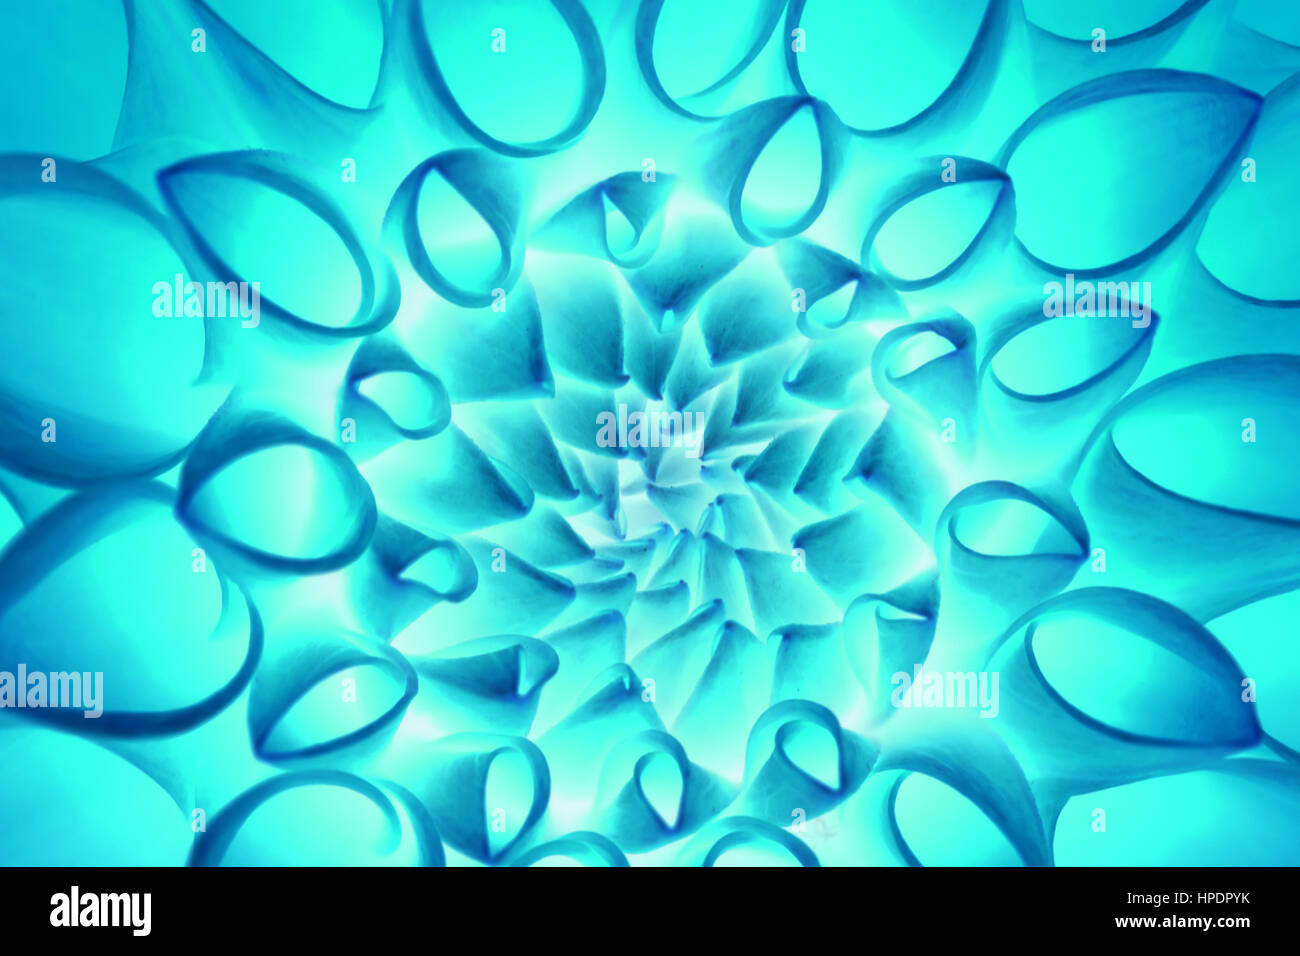 Psychedelic blue flower abstract Stock Photo